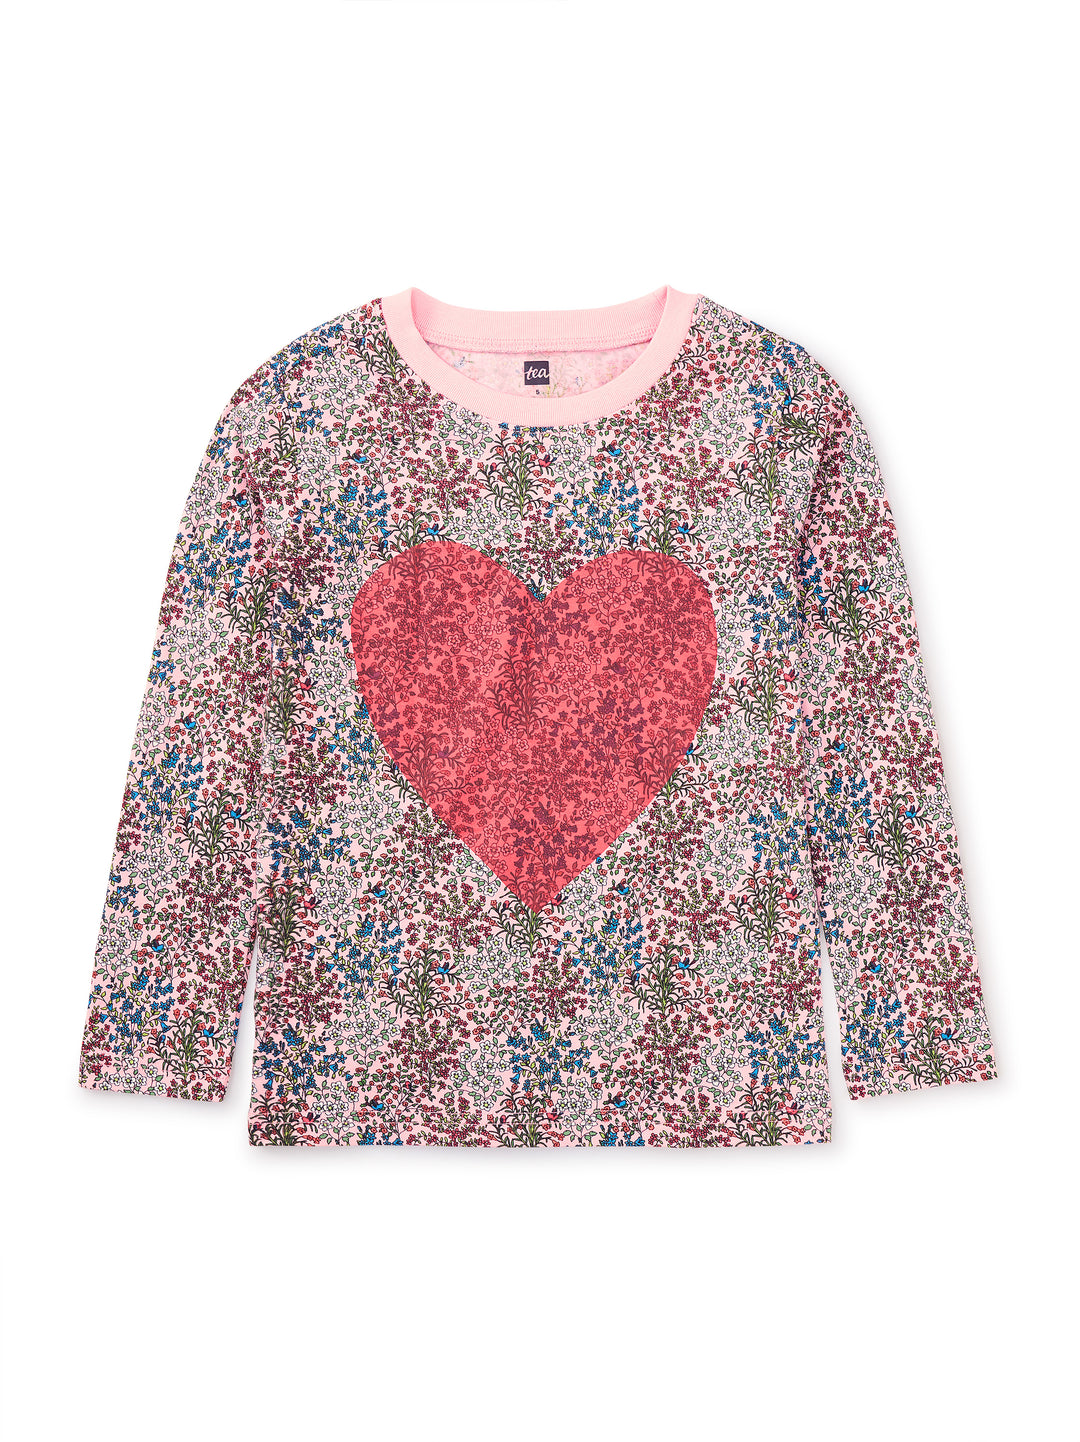 Heart & Flowers Graphic Top